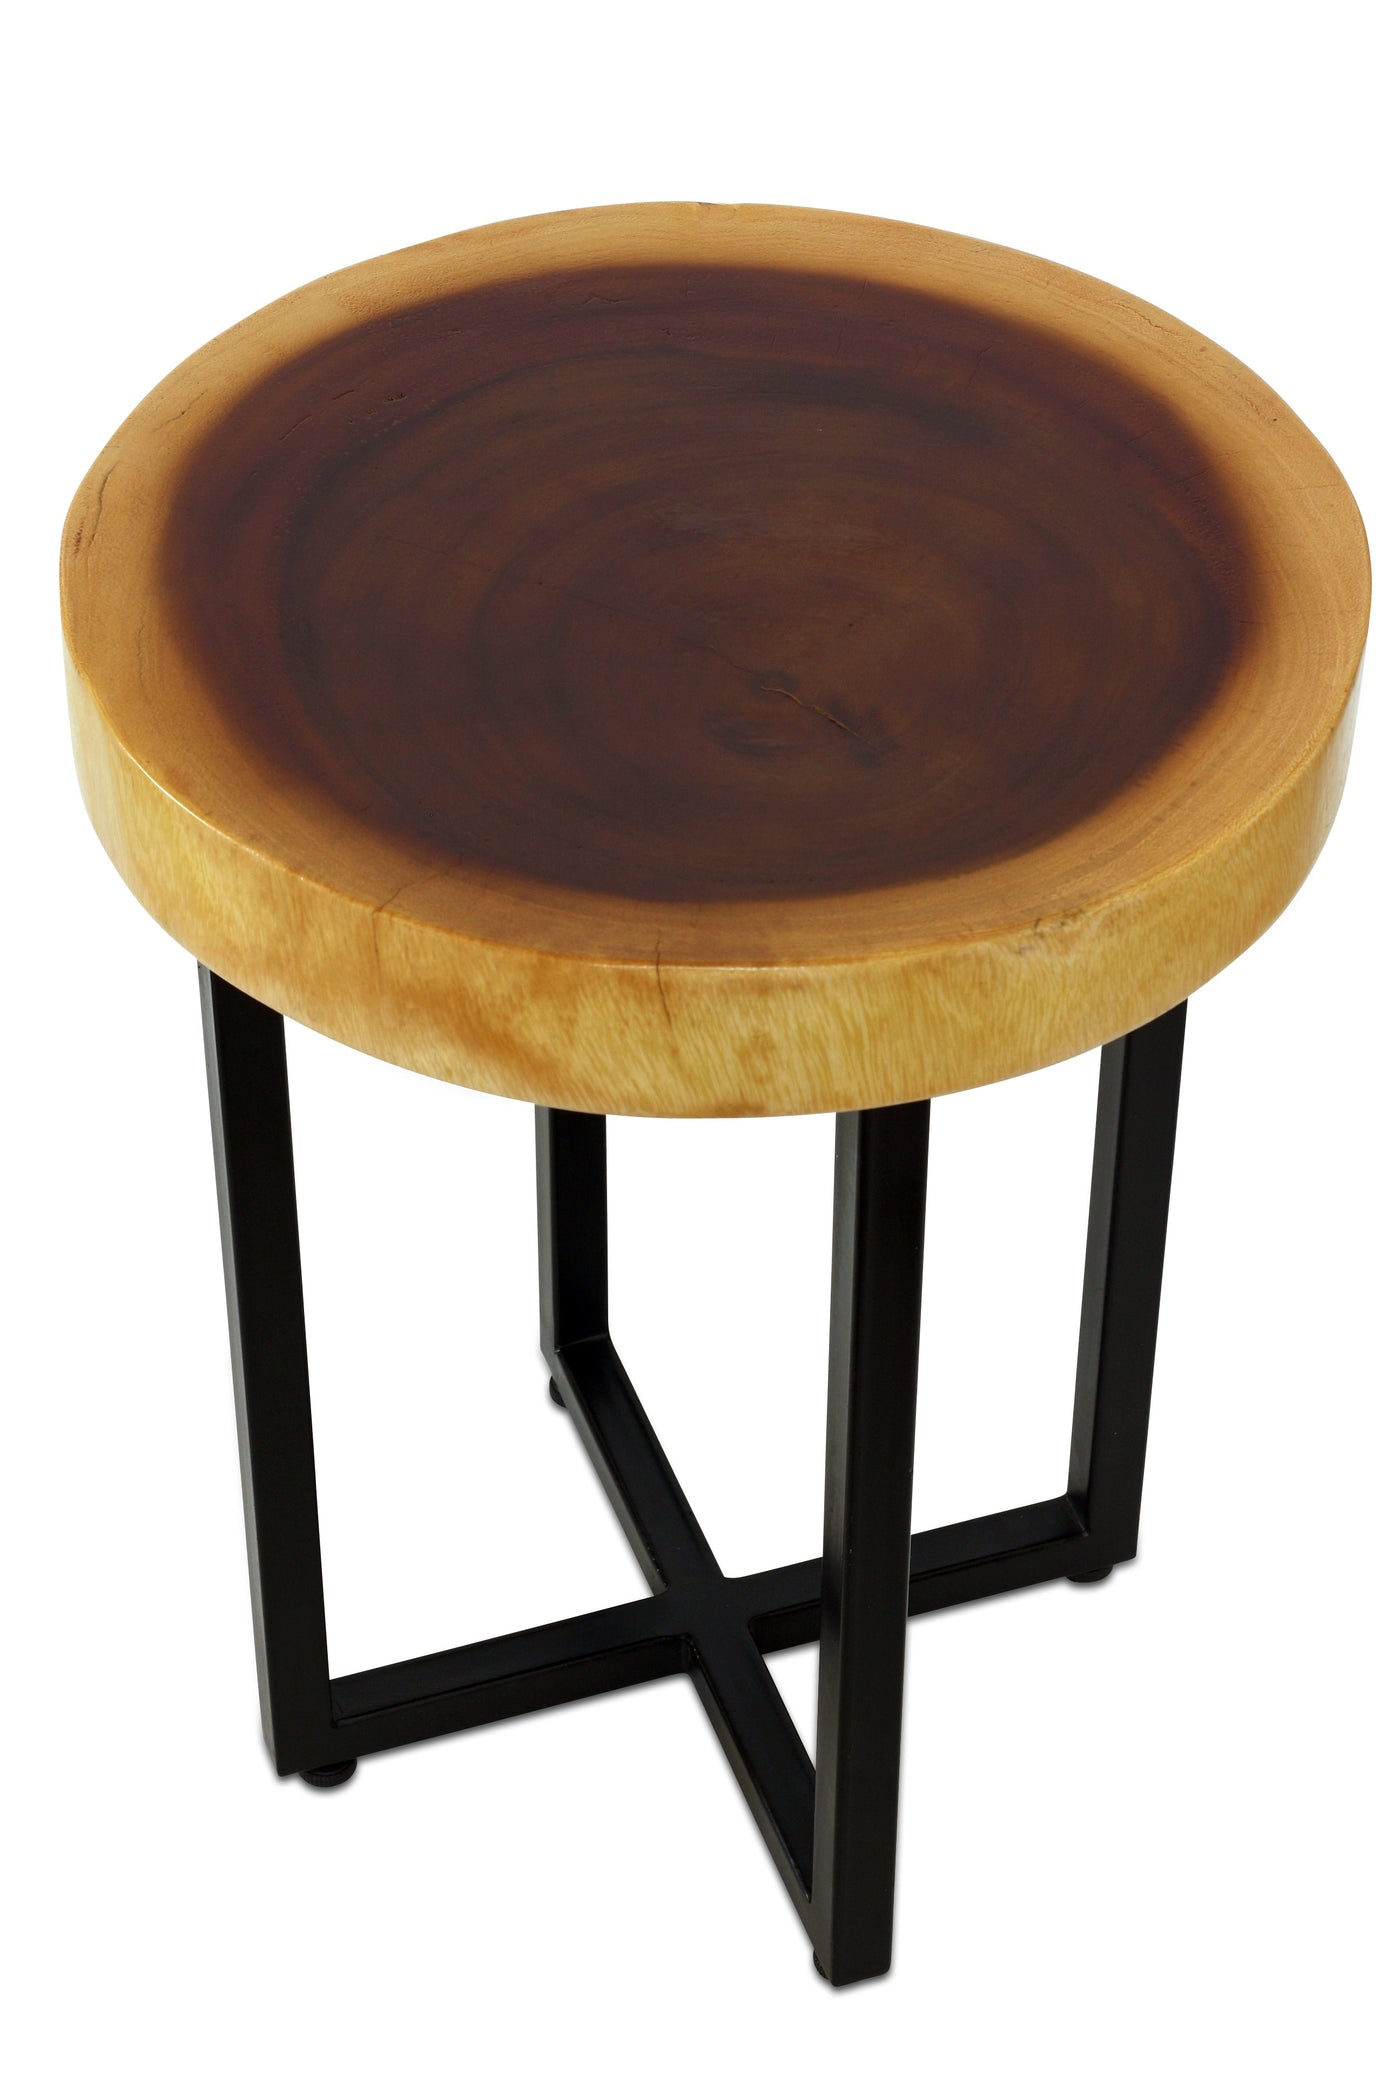 18" Wooden Hand Carved Modern Stool Solid Wood Rustic Handmade Home Decor Night Stand Accent Display Side End Table WST-IR2 Stool